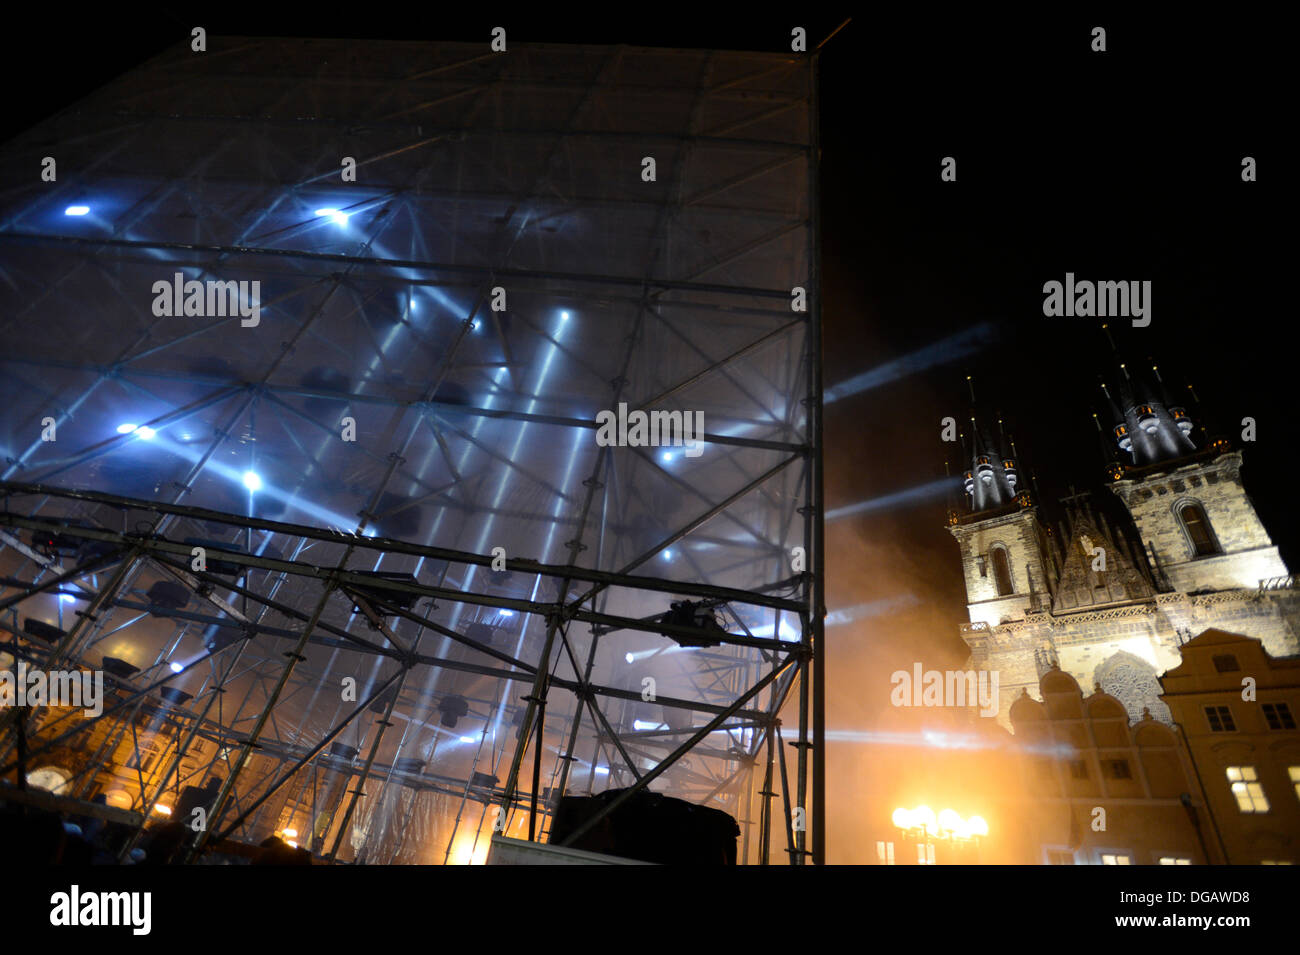 Prague, Czech Republic. 17th October 2013. The first year of the biggest festival of light in the Czech Republic starts on October 17, 2013. HyperCube by the French architects Pierre Schneider and Francoise Wunschel pictured on Old Town Square in Prague. (CTK Photo/Michal Krumphanzl/Alamy Live News) Stock Photo